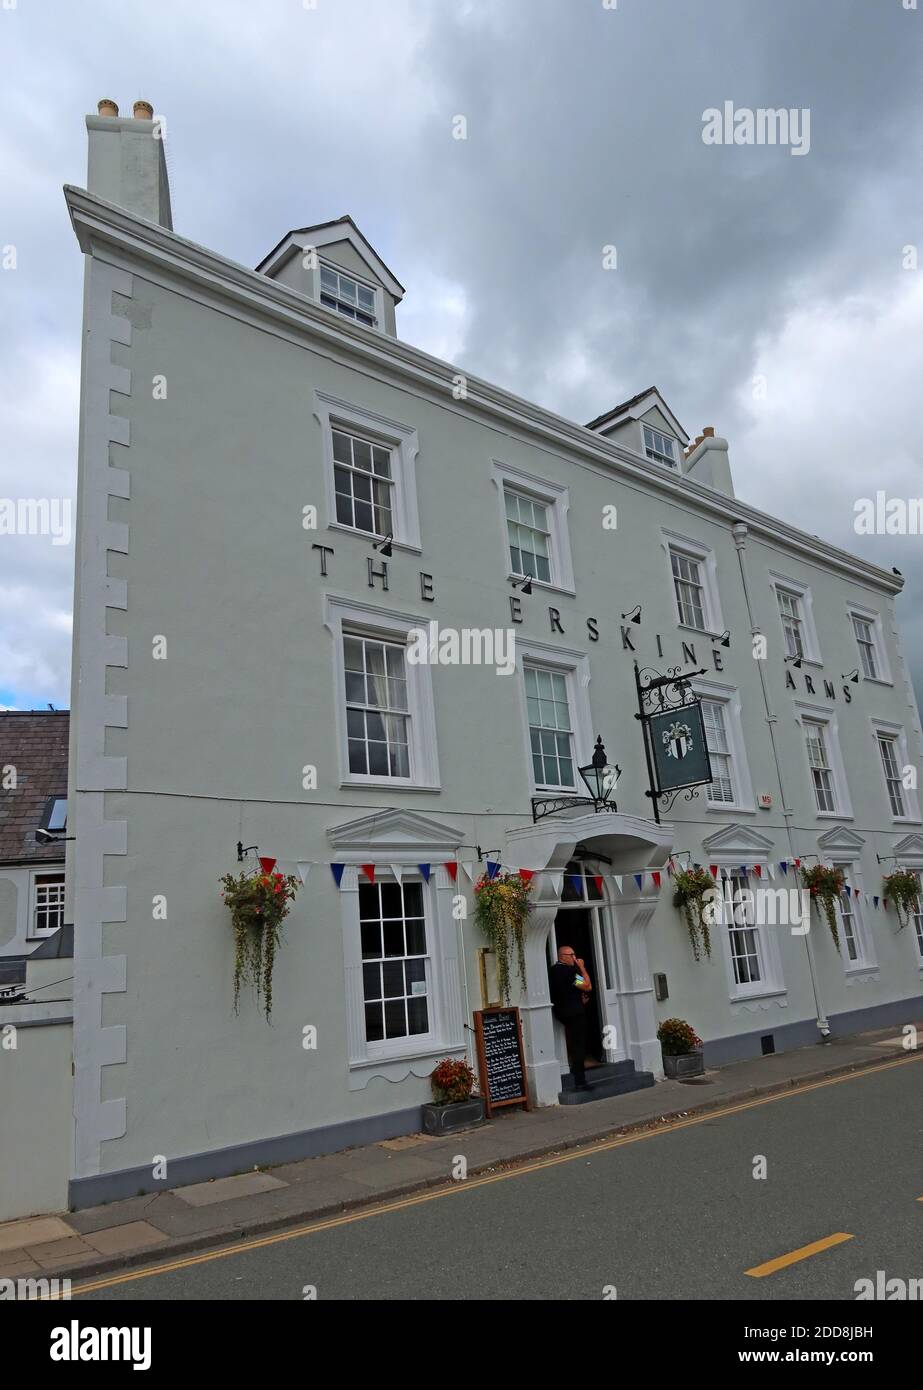 The Erskine Arms Hotel, Rose Hill Street, Conwy, Wales, UK, LL32 8LD Stockfoto